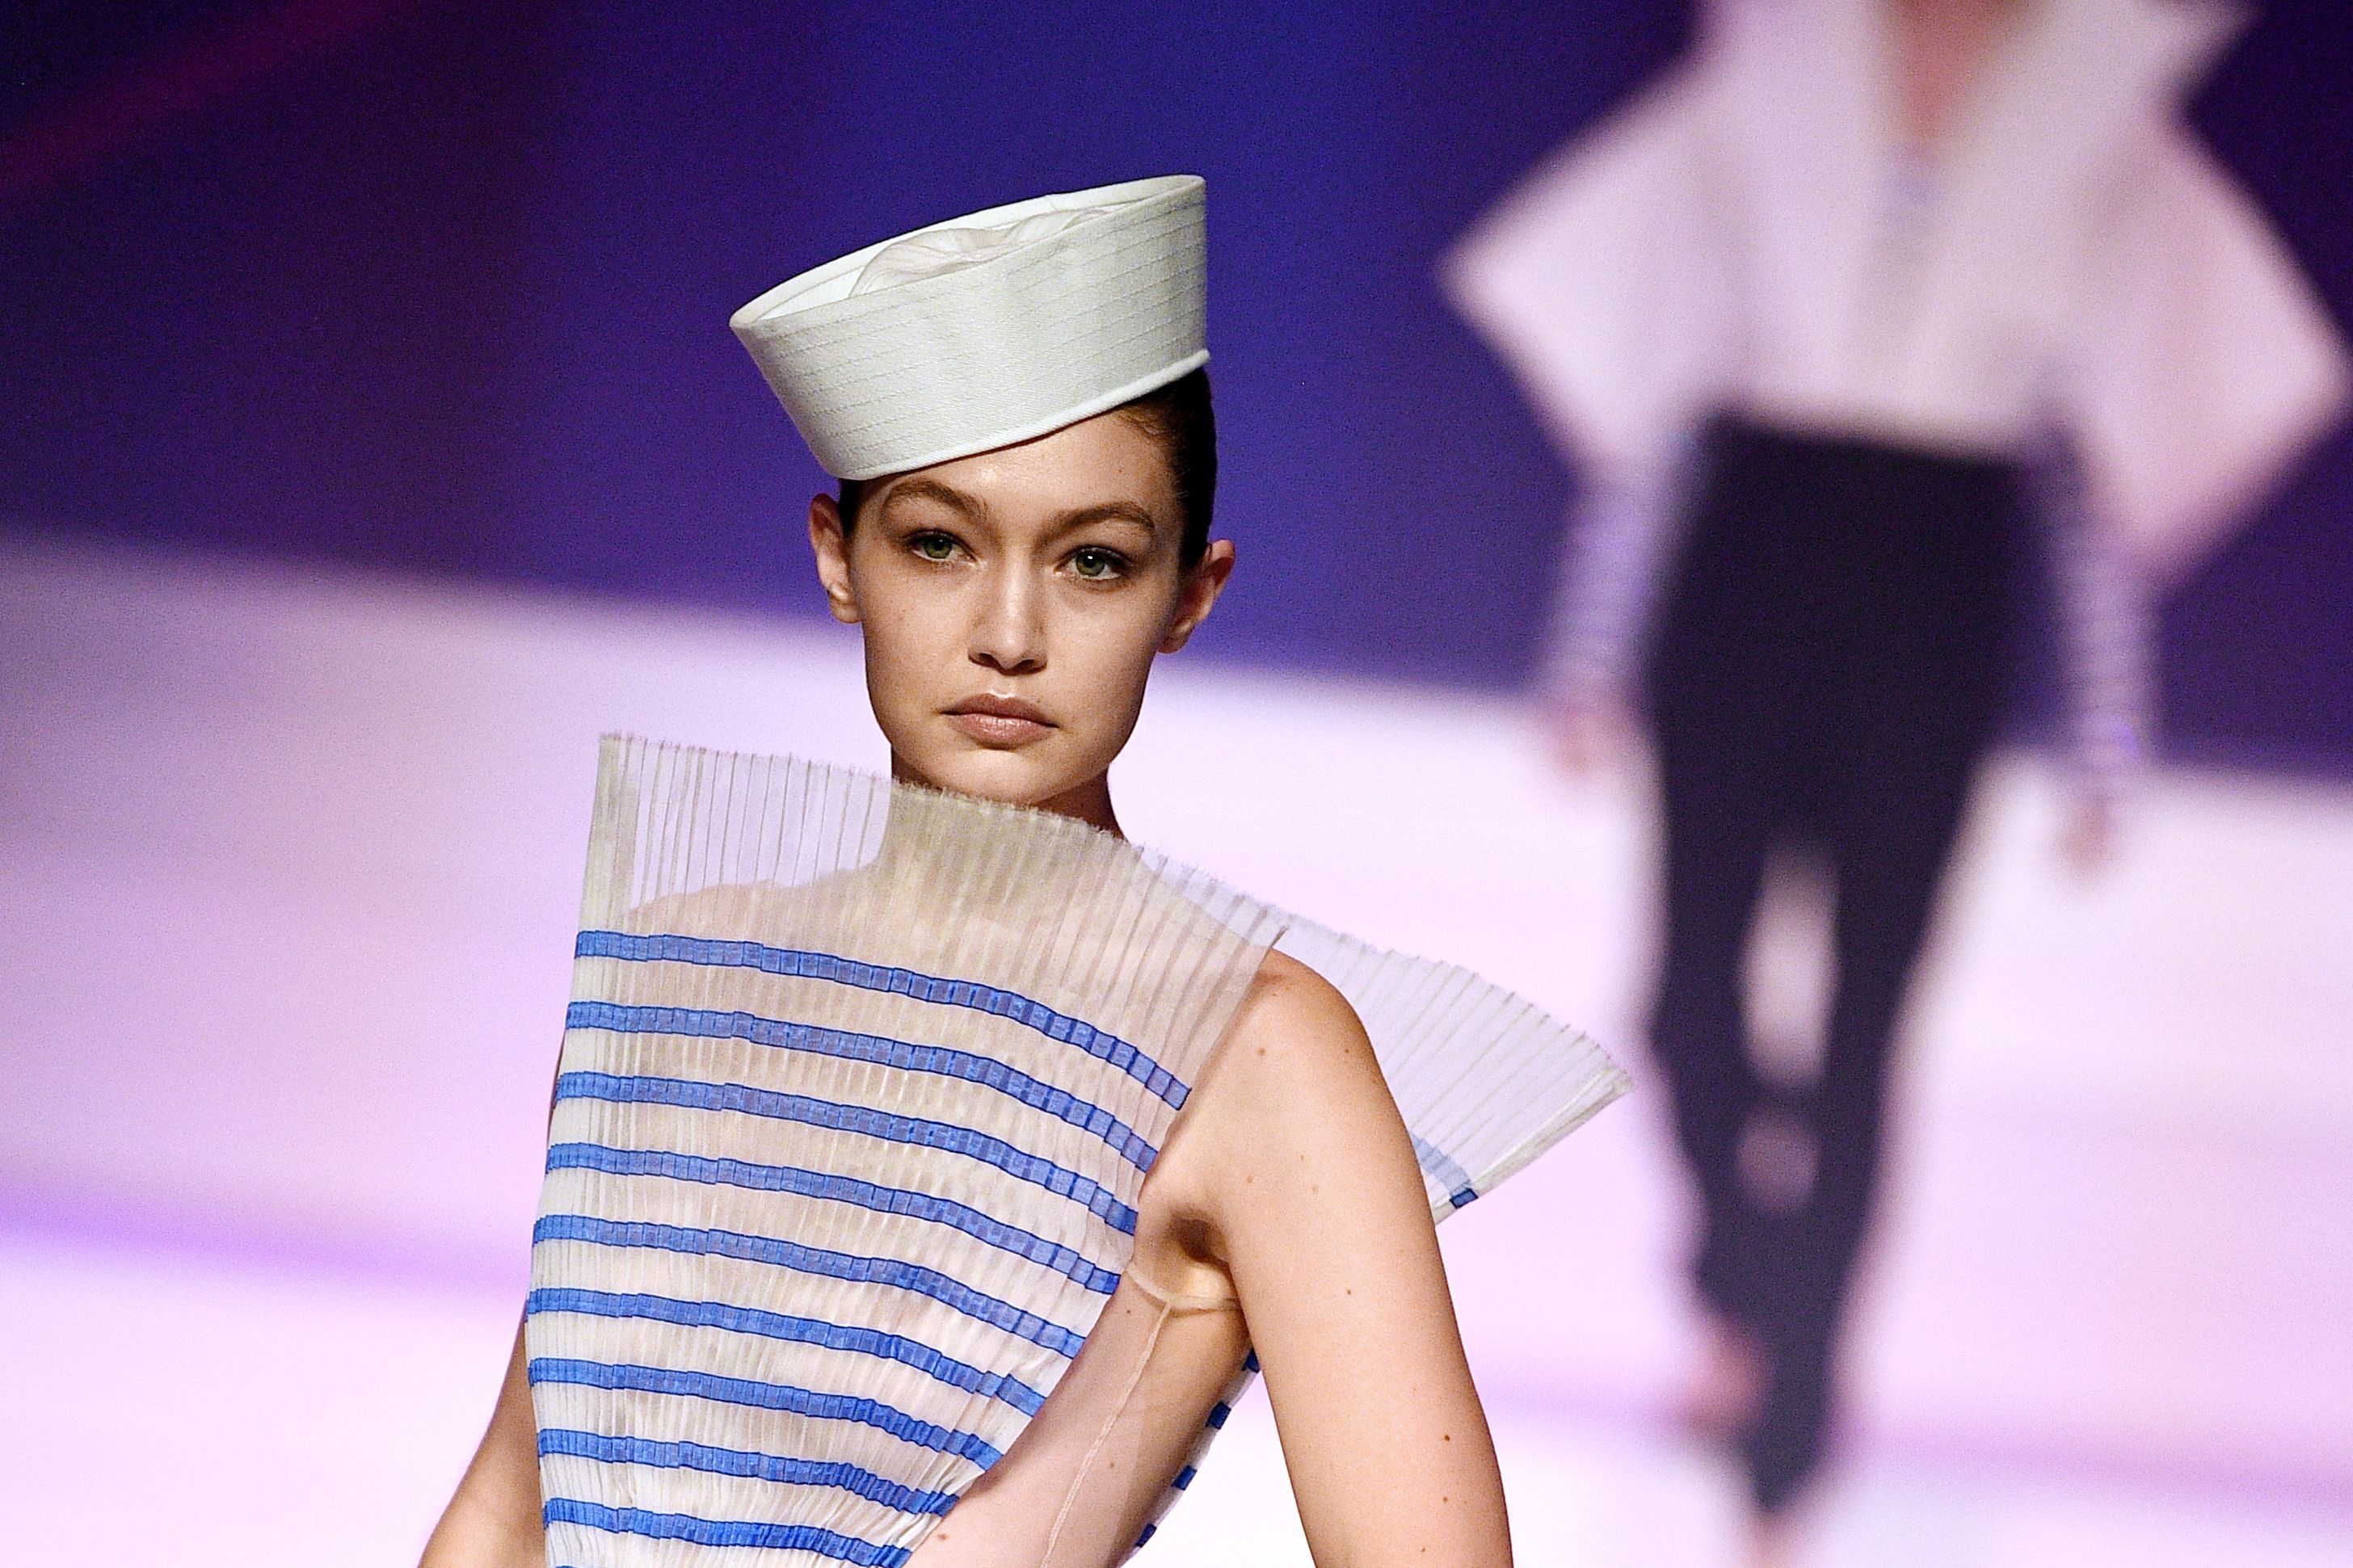 Jean-Paul Gaultier: Stars turn out for designer's final show - BBC News